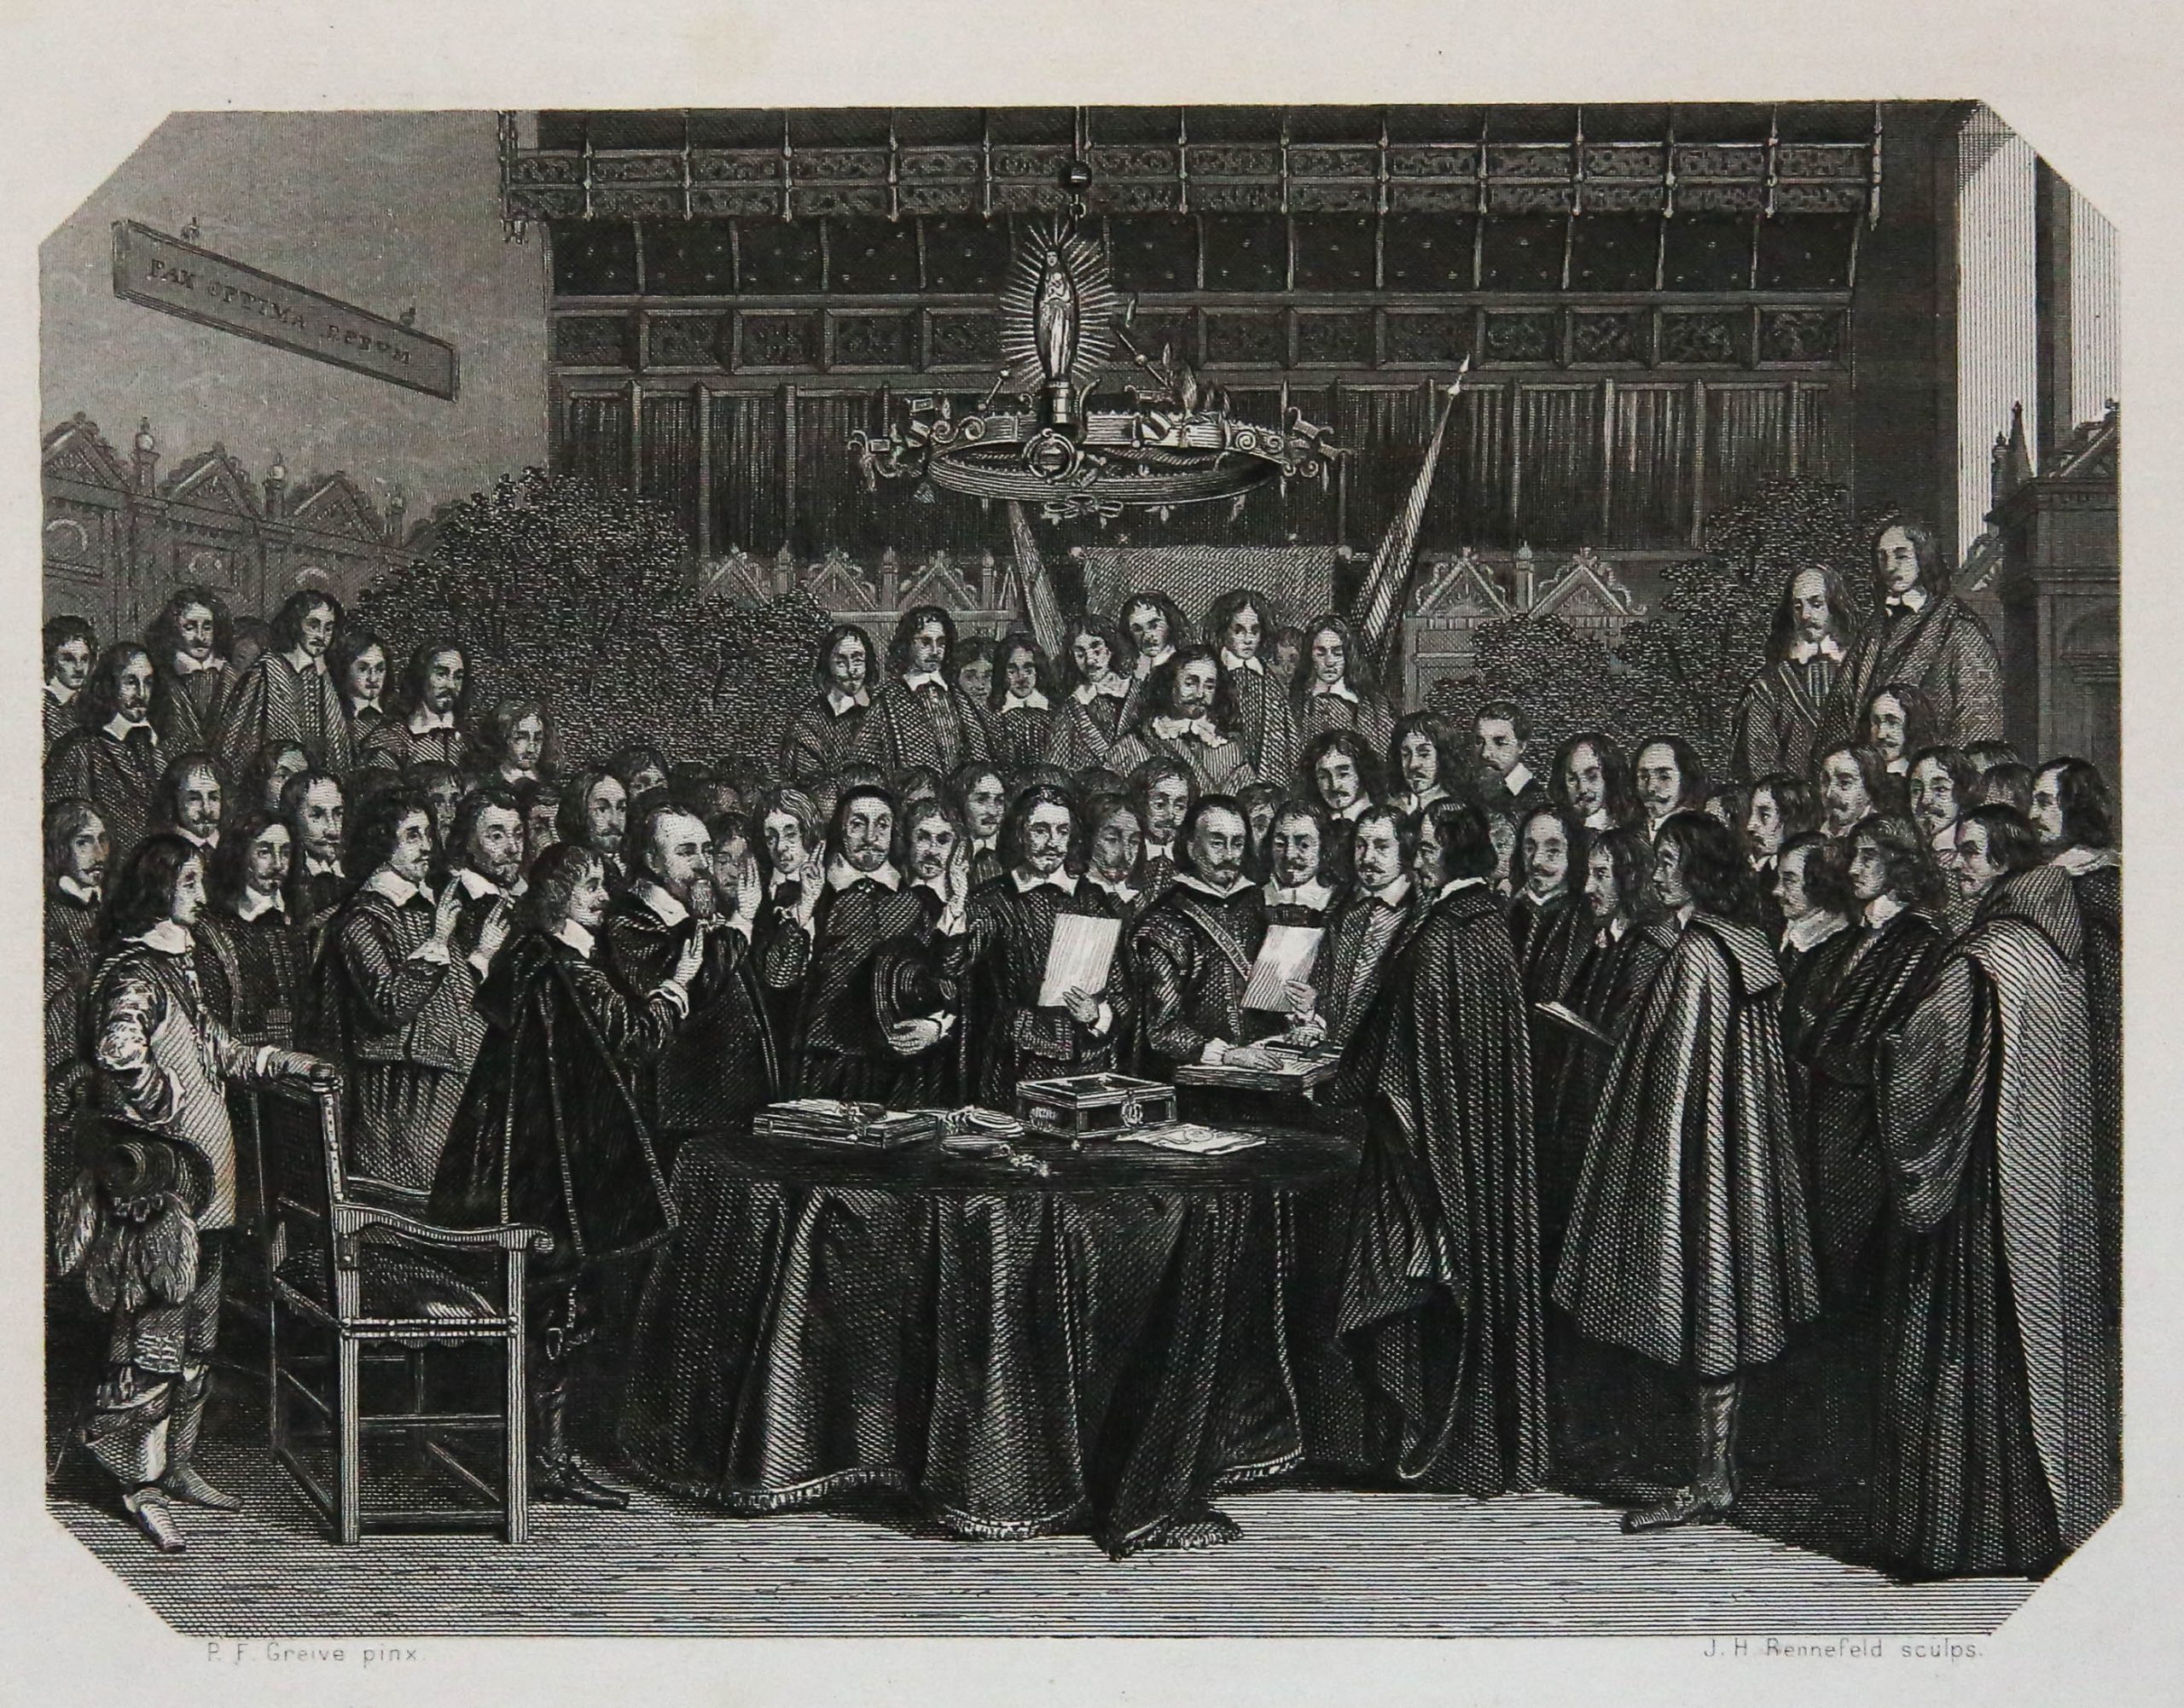 [Antique print, engraving] Ratification of the treaty of Münster, published ca. 1868-1872.